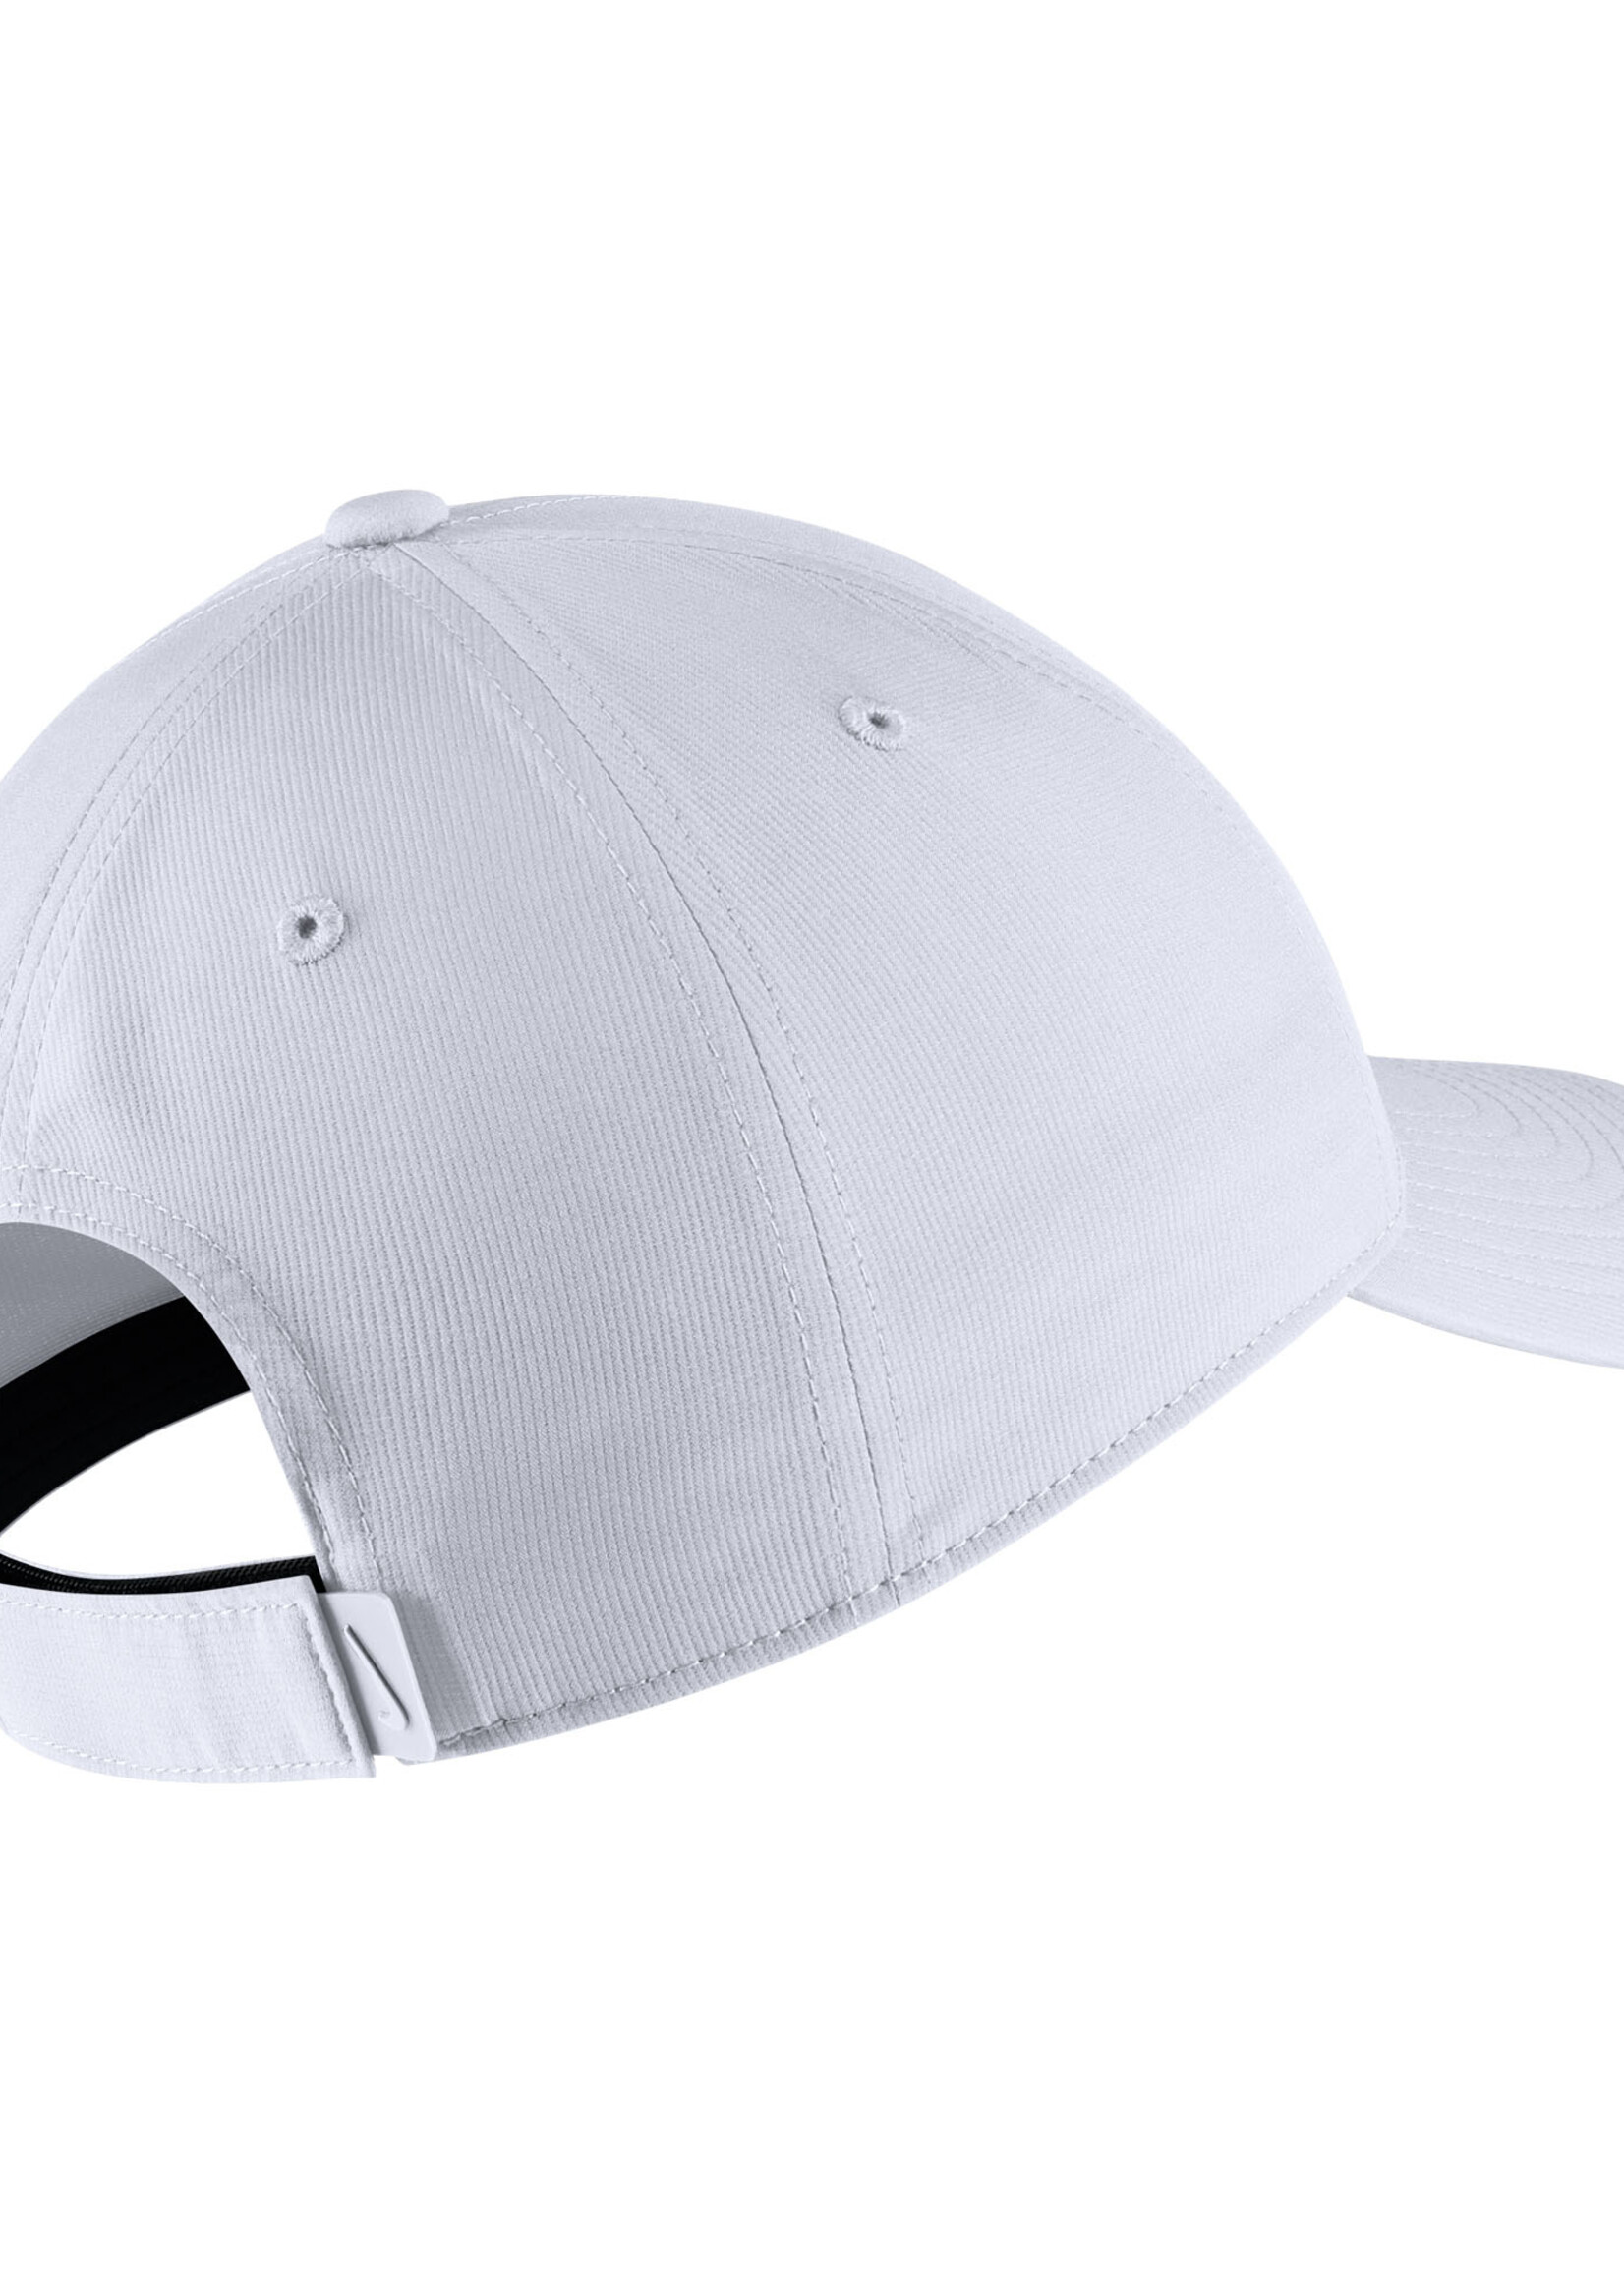 Nike Nike BYUH With Islands Cap -